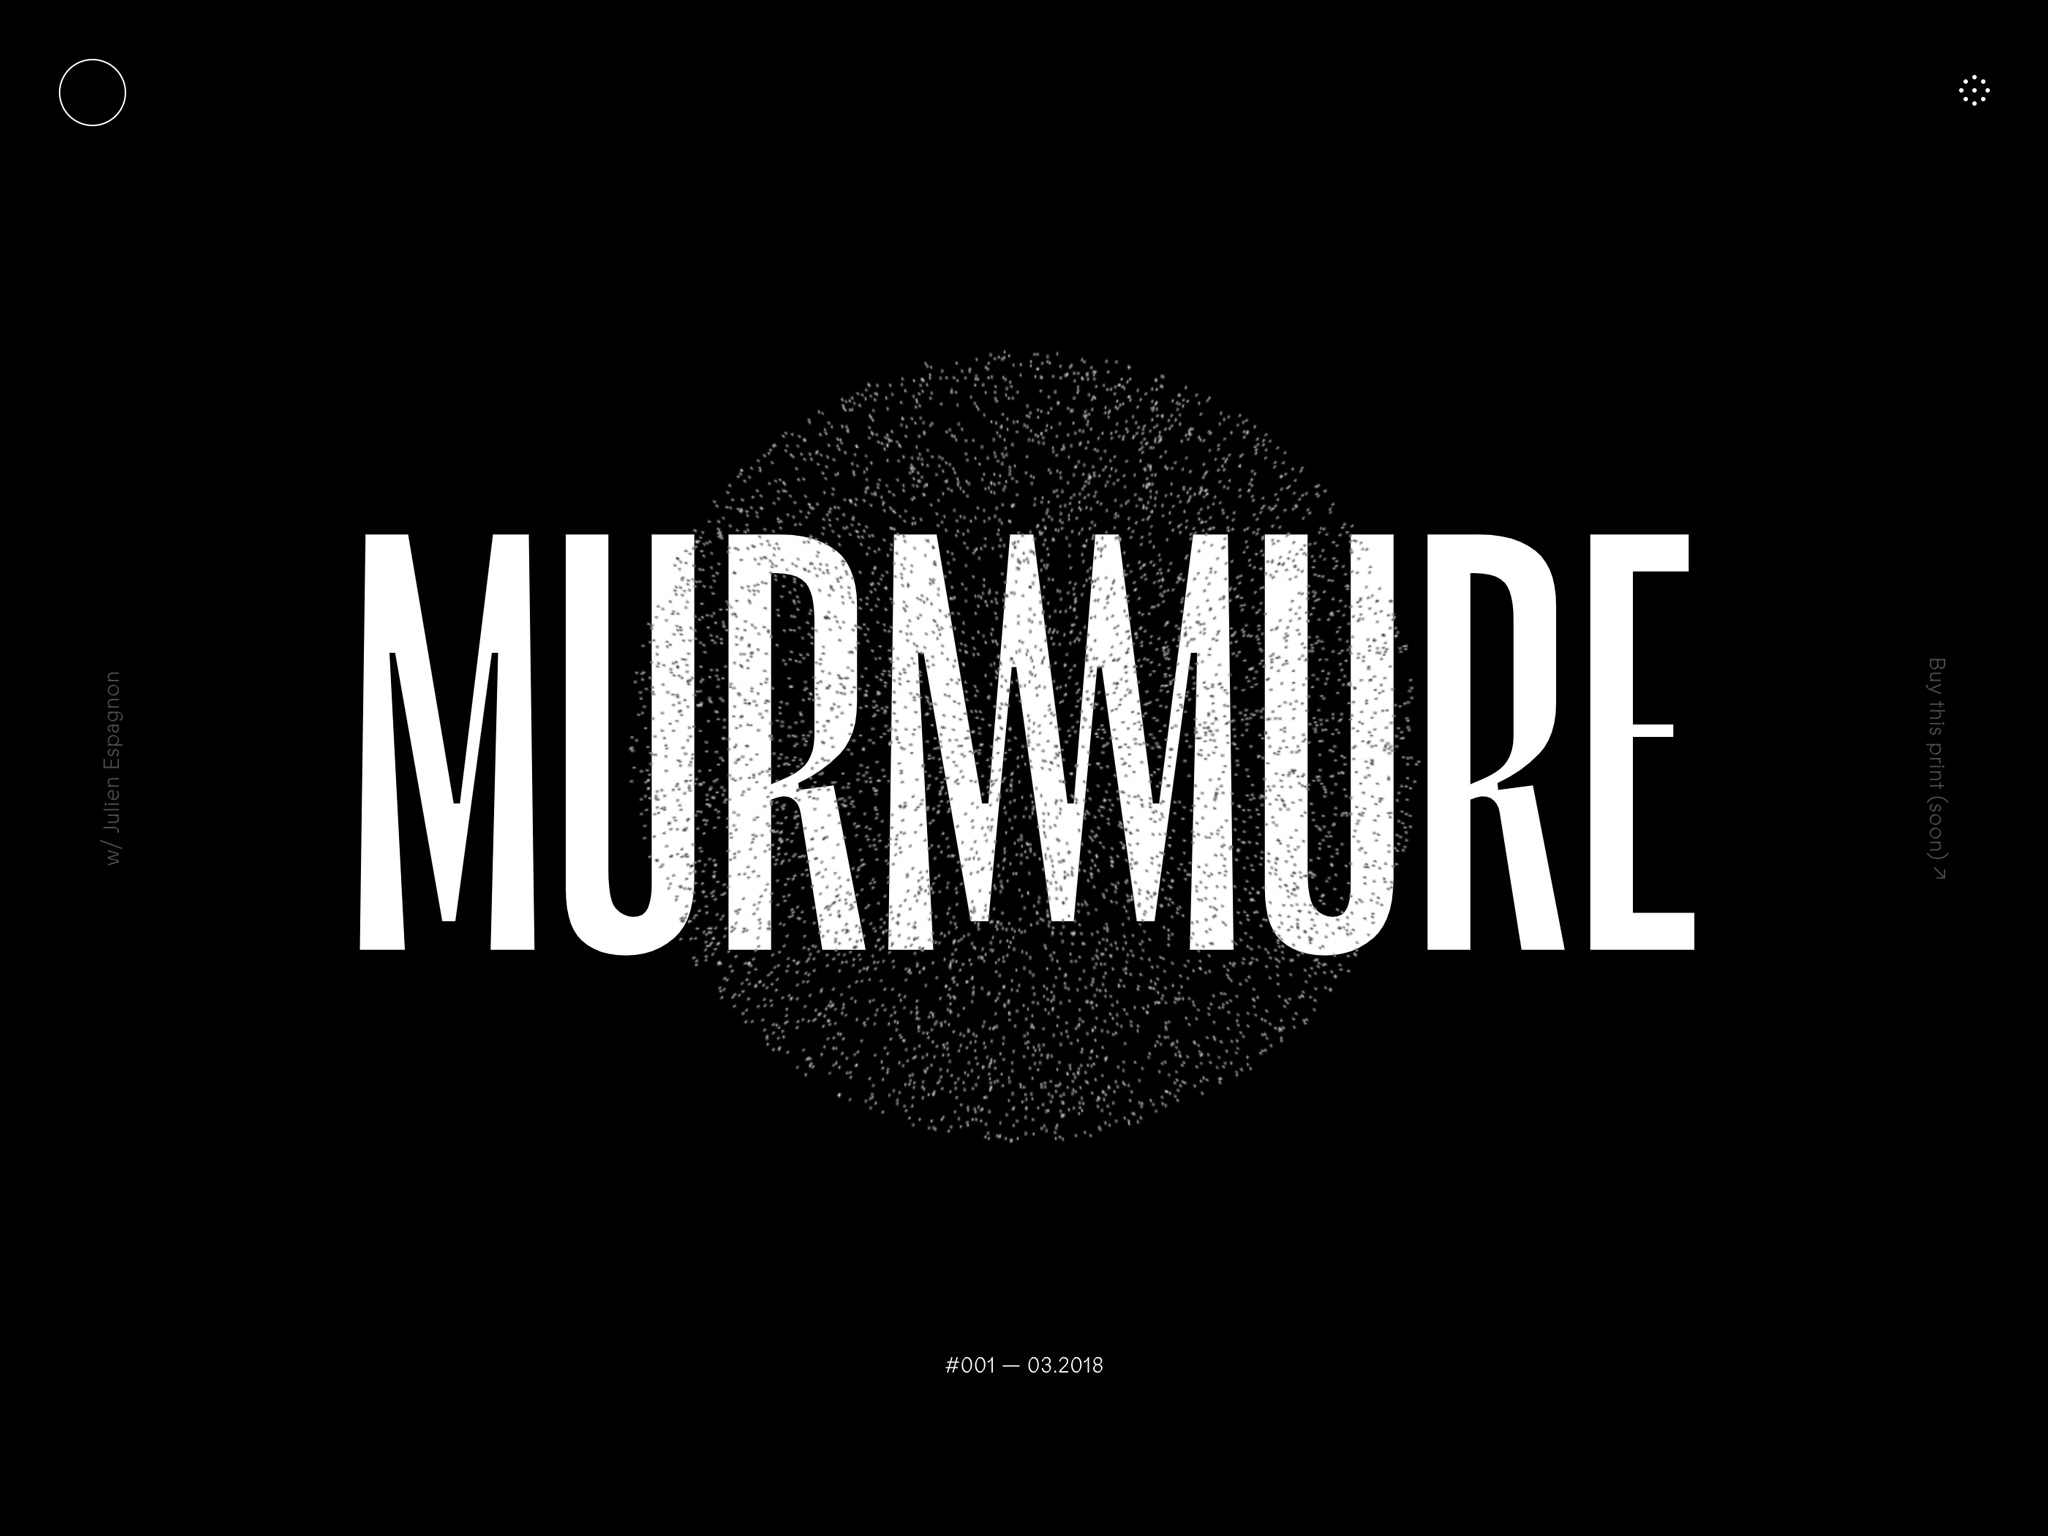 Murmure – French creative agency located in Caen and Paris